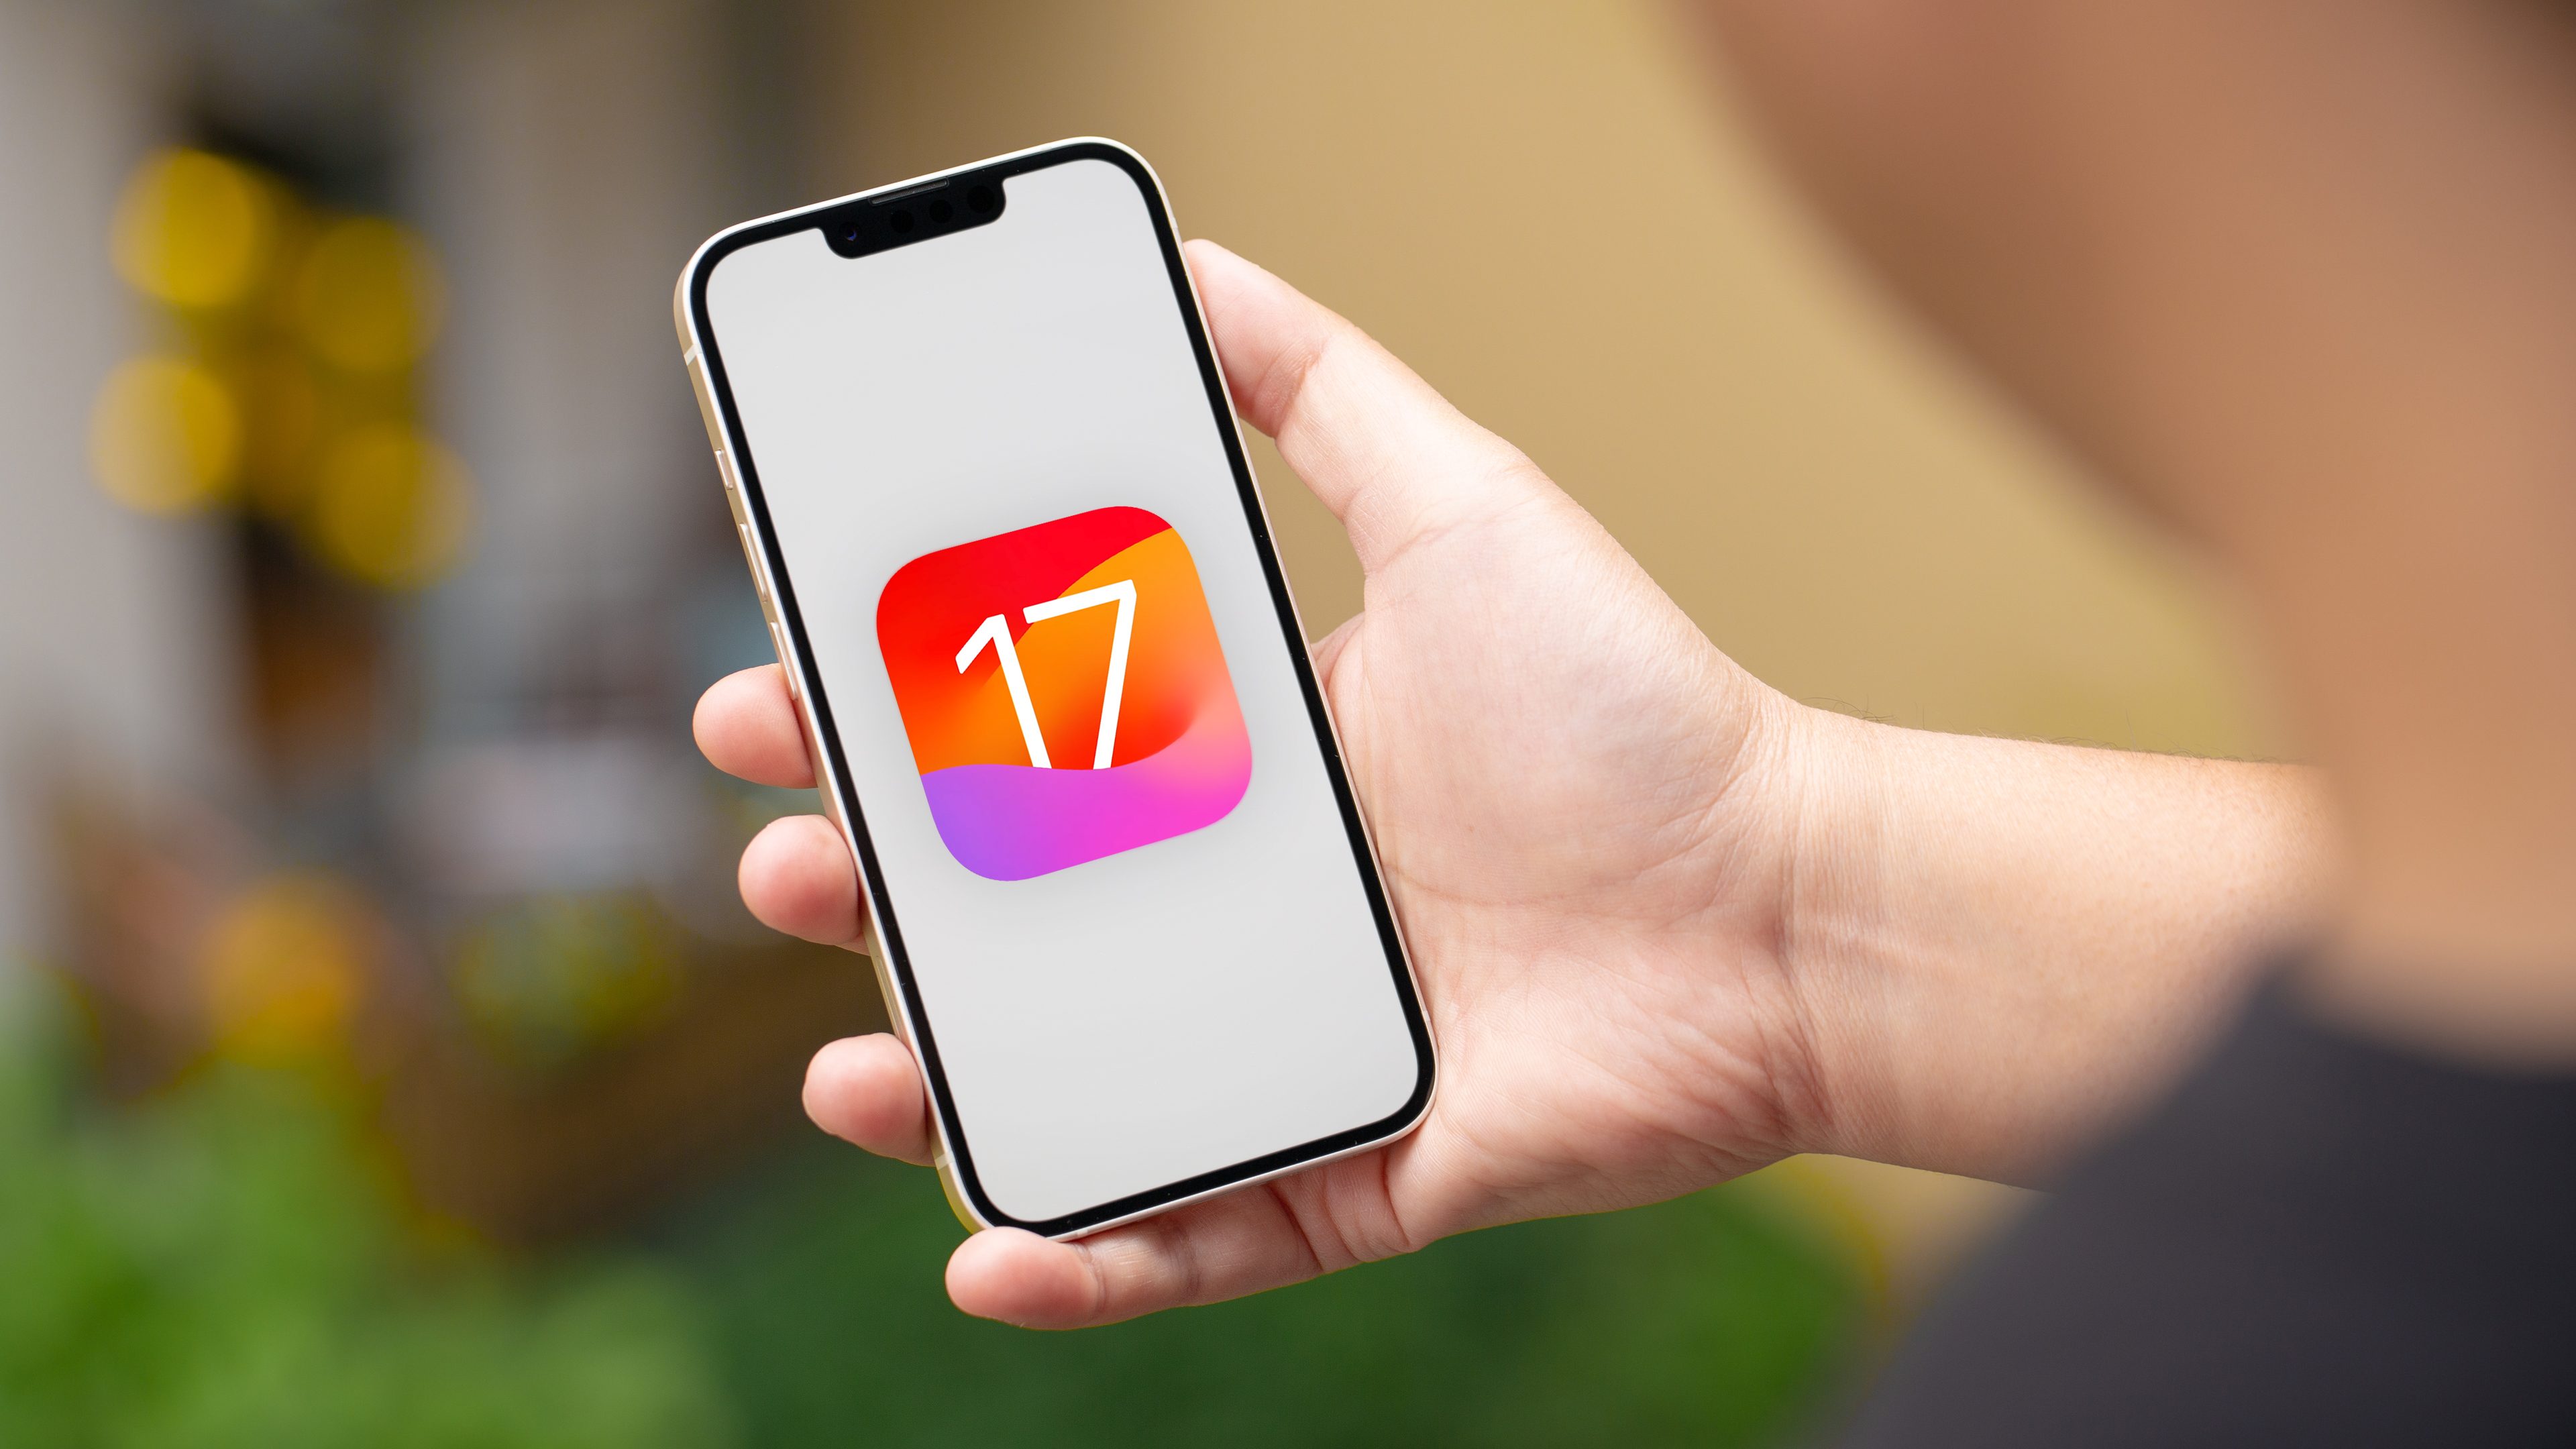 A Detailed Look at iOS 17's New and Exciting Features